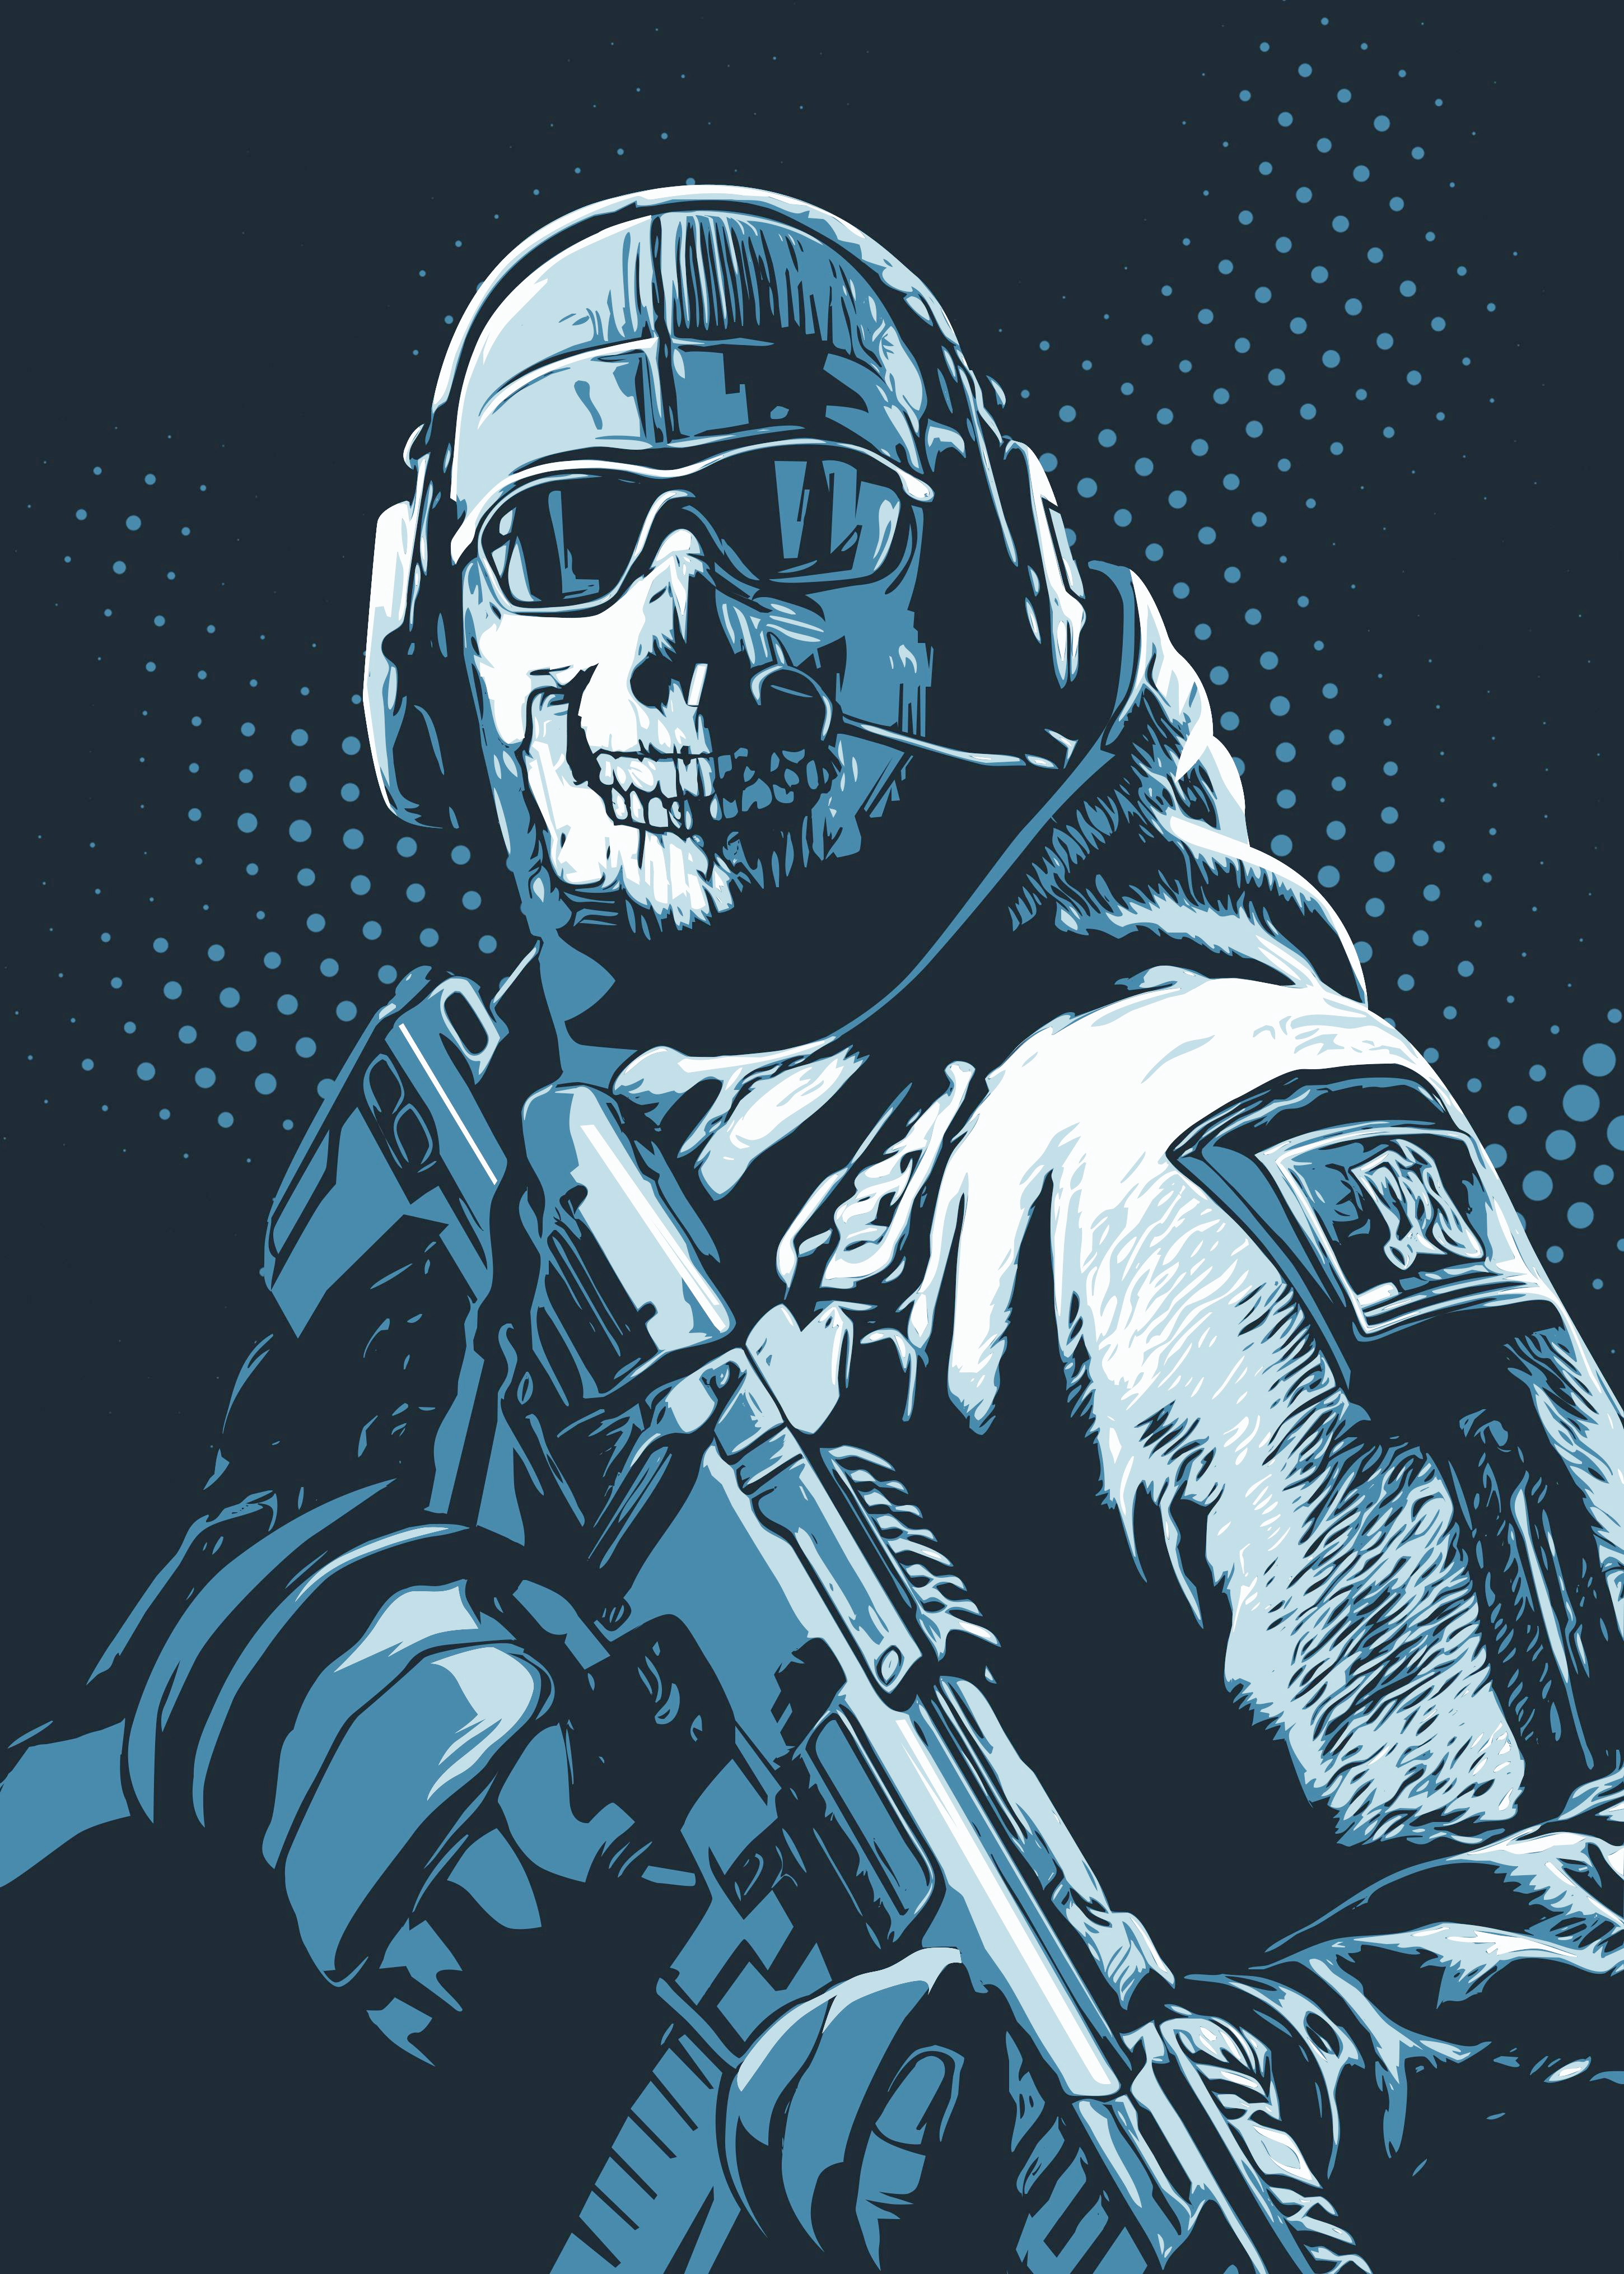 Simon Ghost Riley icon  Ghost, Call of duty ghosts, Call off duty